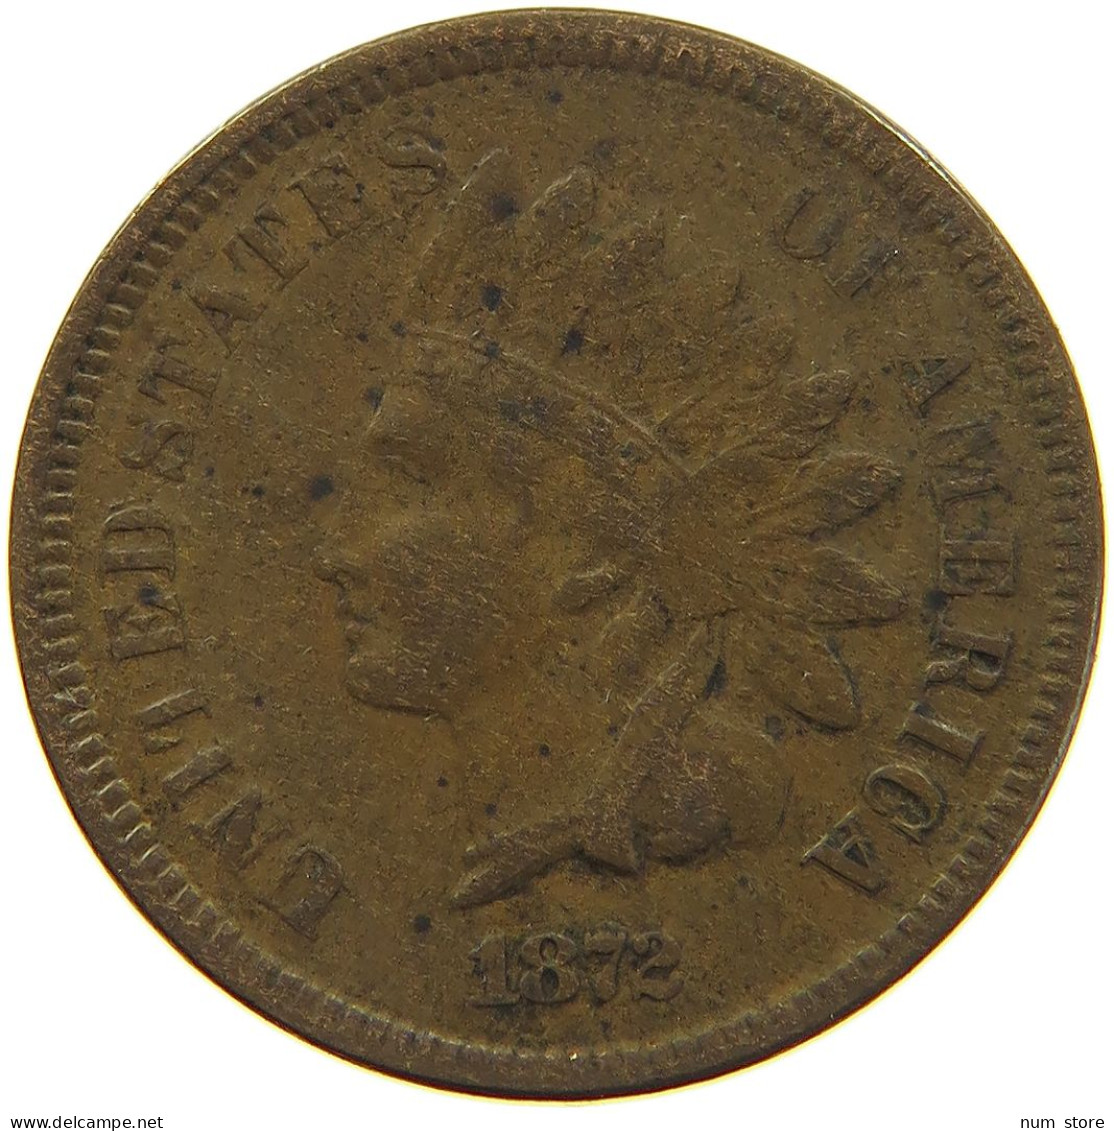 UNITED STATES OF AMERICA CENT 1872 INDIAN HEAD #MA 103876 - 1859-1909: Indian Head